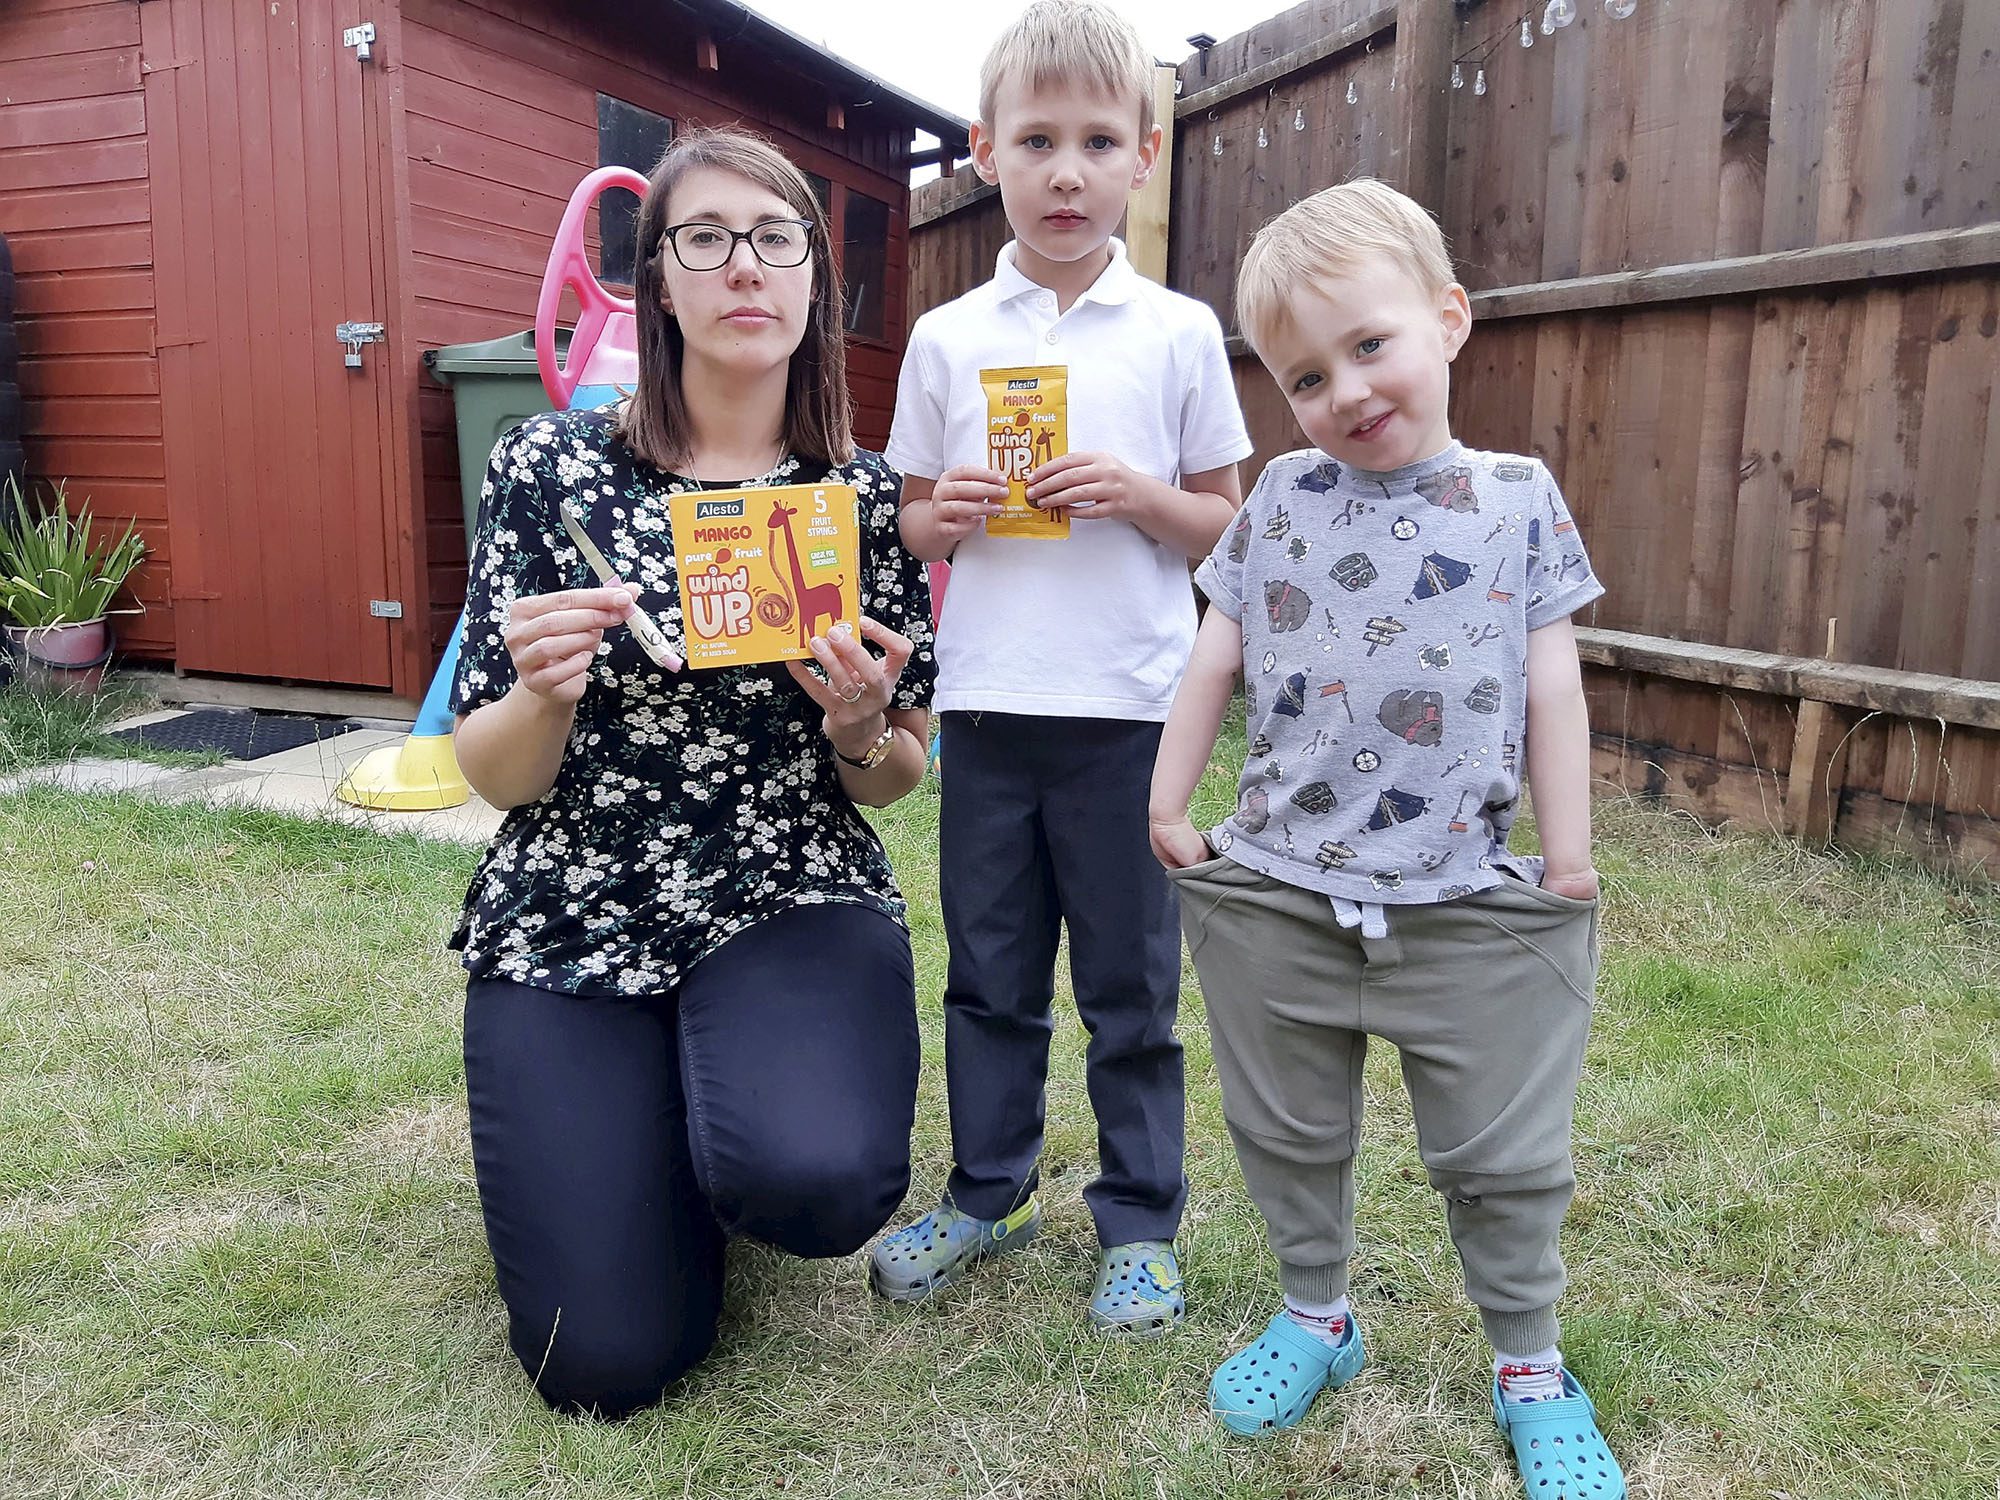 Tracey Croft and sons Kenneth (5) and Corey (3) pose with the knife in undated photograph. The mom-of-two was shocked to find a sharp knife in a box of children’s snacks. (Stamford Mercury, SWNS/Zenger)